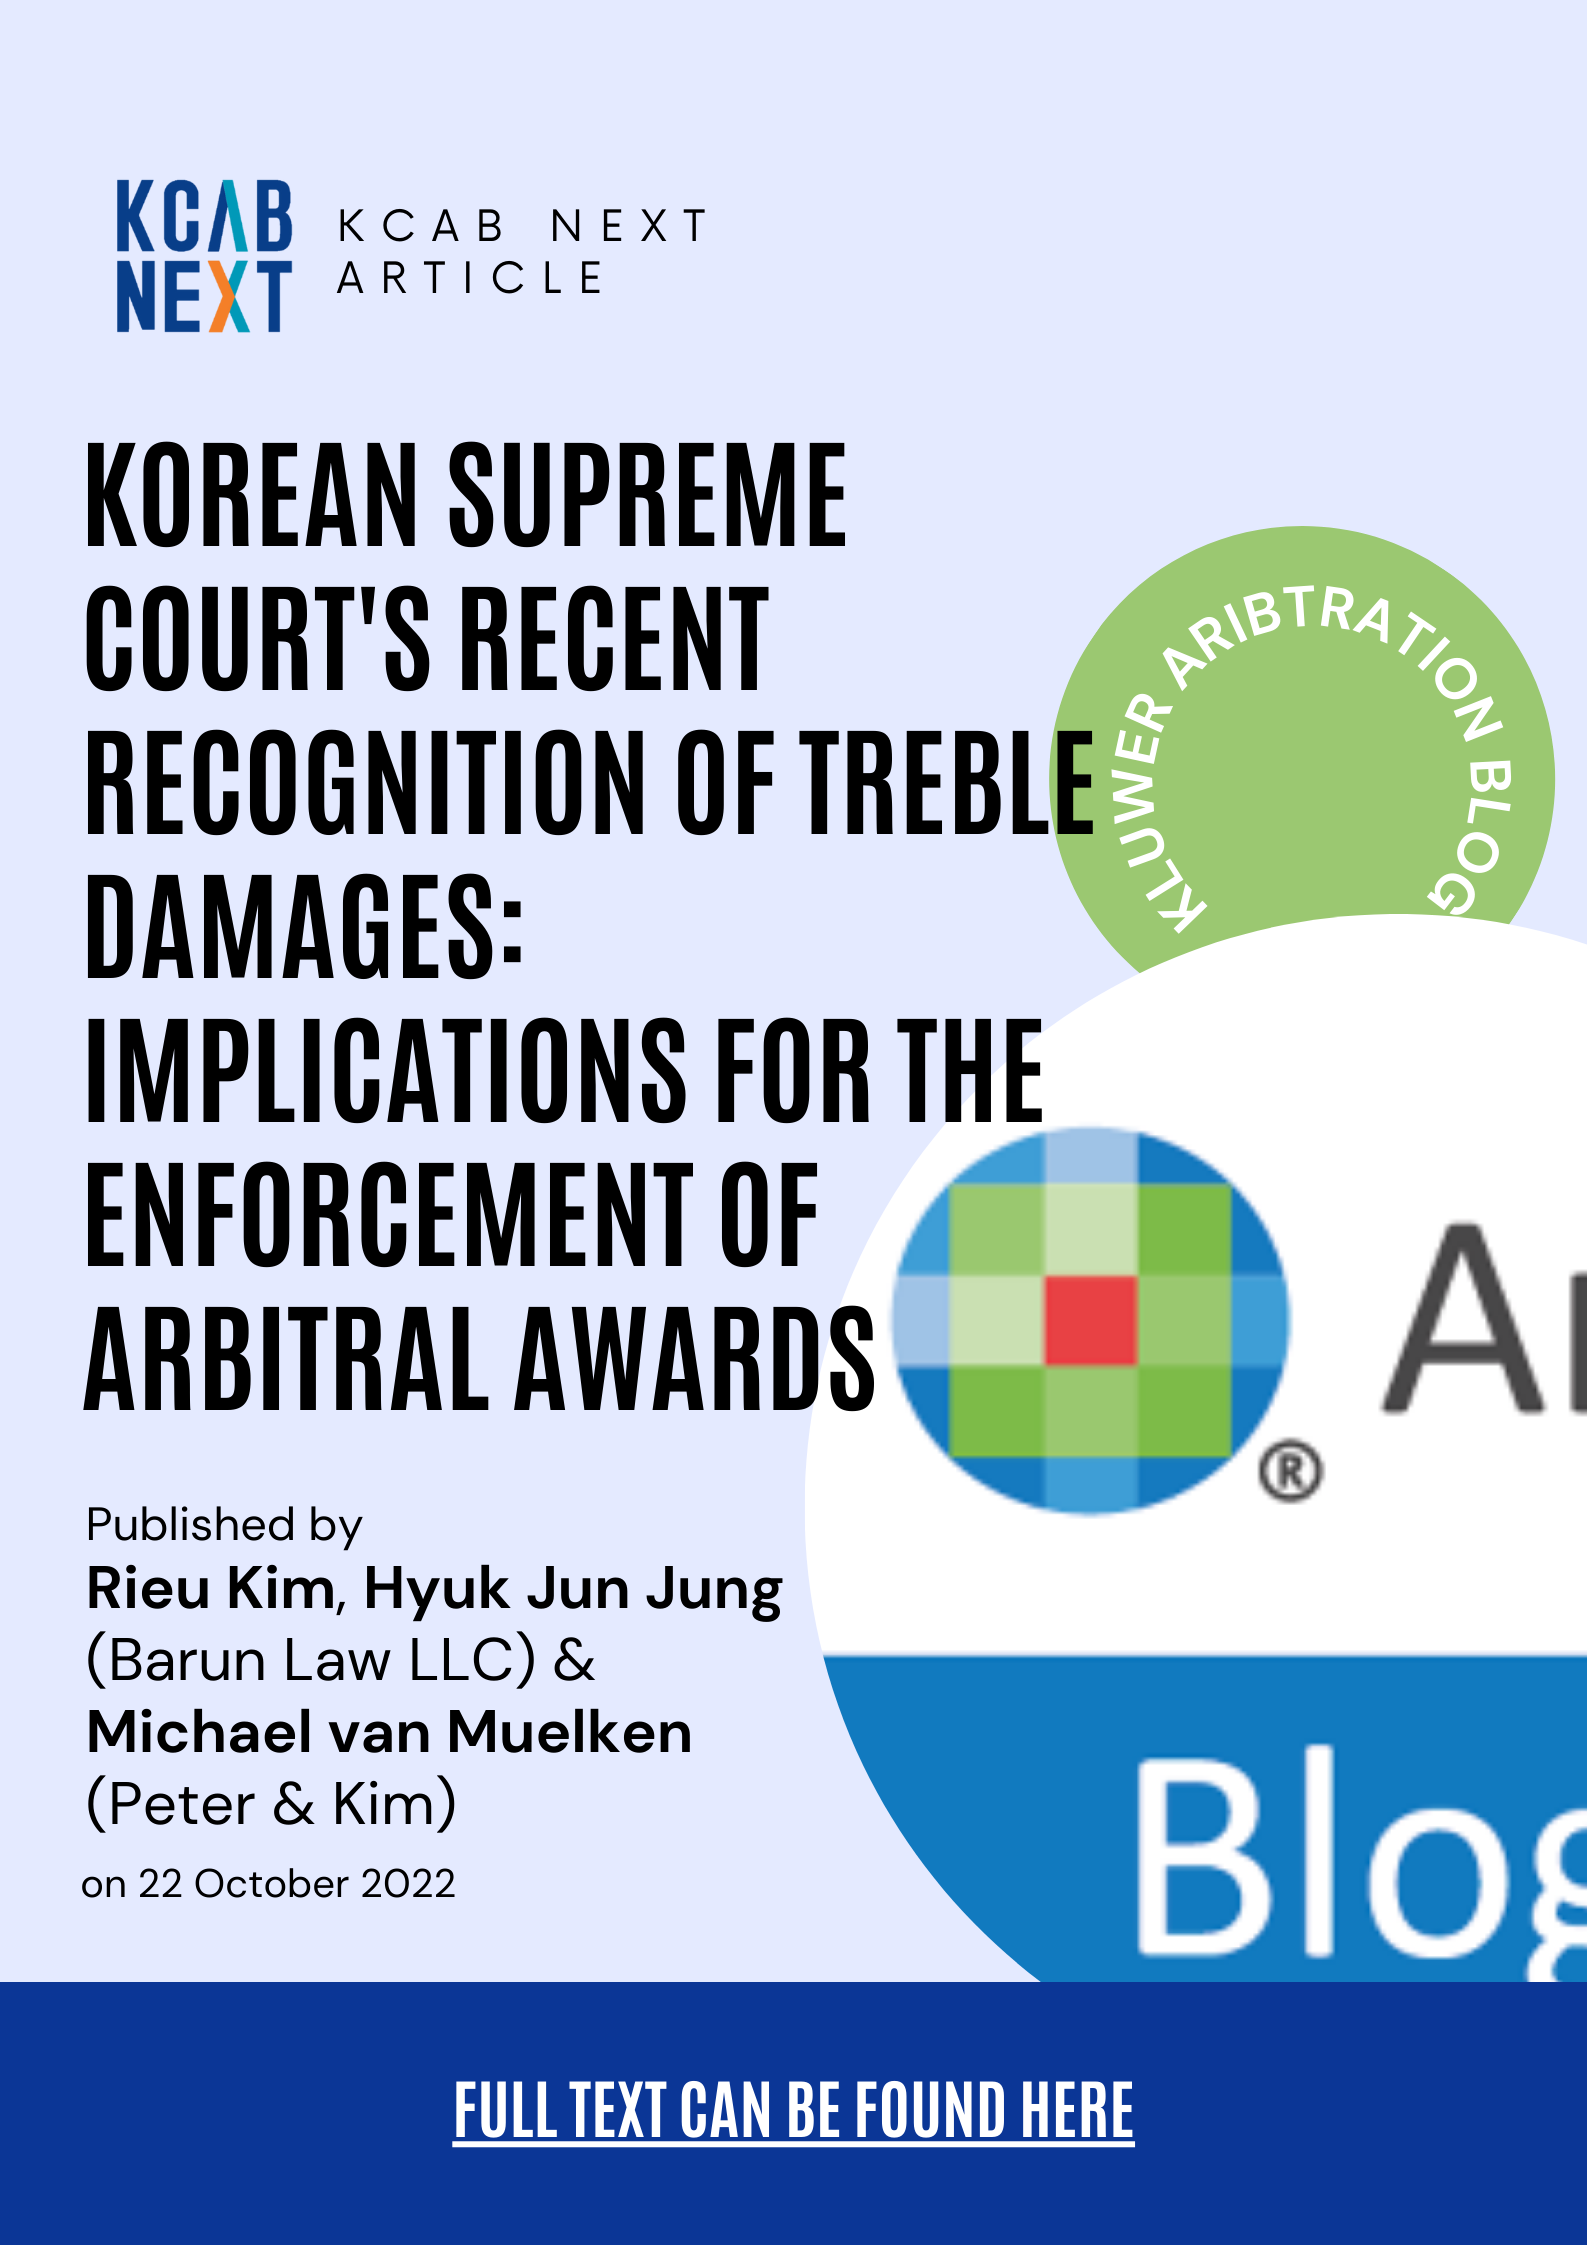 [Article] Korean Supreme Court's Recent Recognition of Treble Damages: Implications for the Enforcement of Arbitral Awards